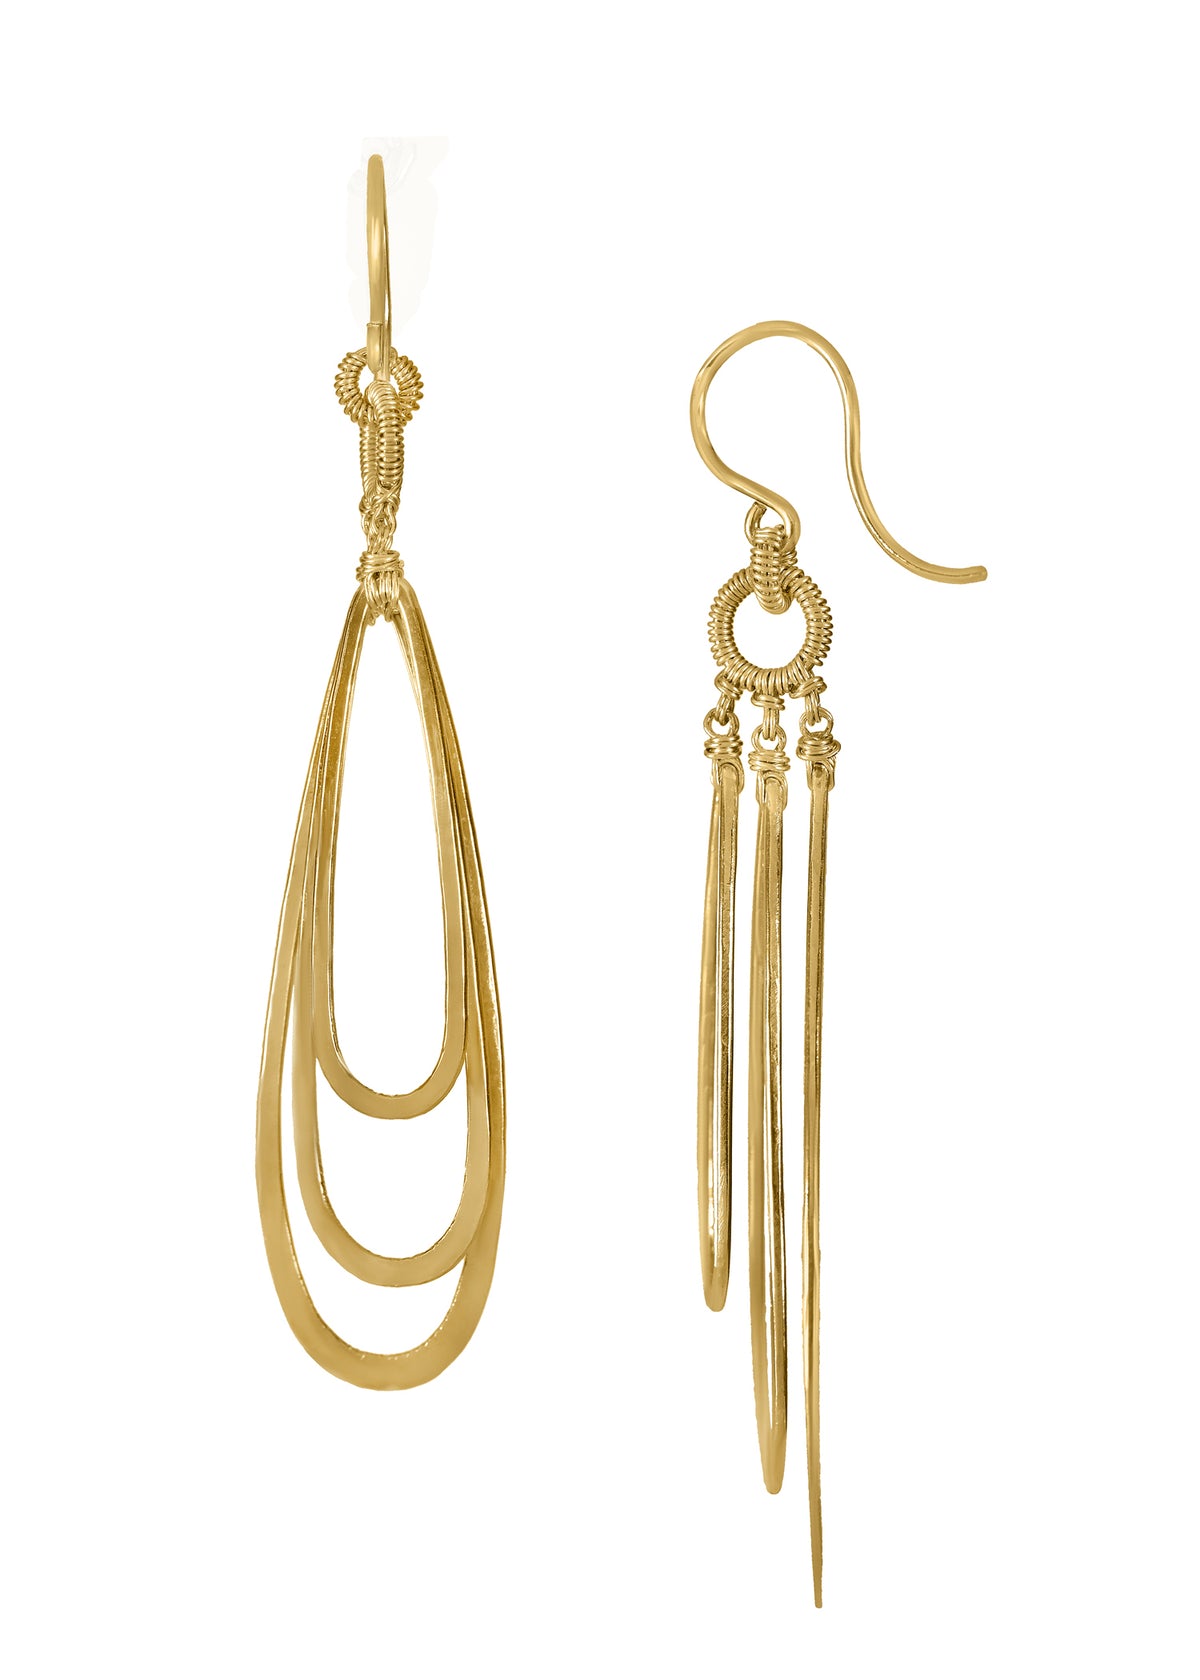 14k gold fill Earrings measure 2-1/2&quot; in length (including the ear wires) and 1/2&quot; in width at the widest point Handmade in our Los Angeles studio